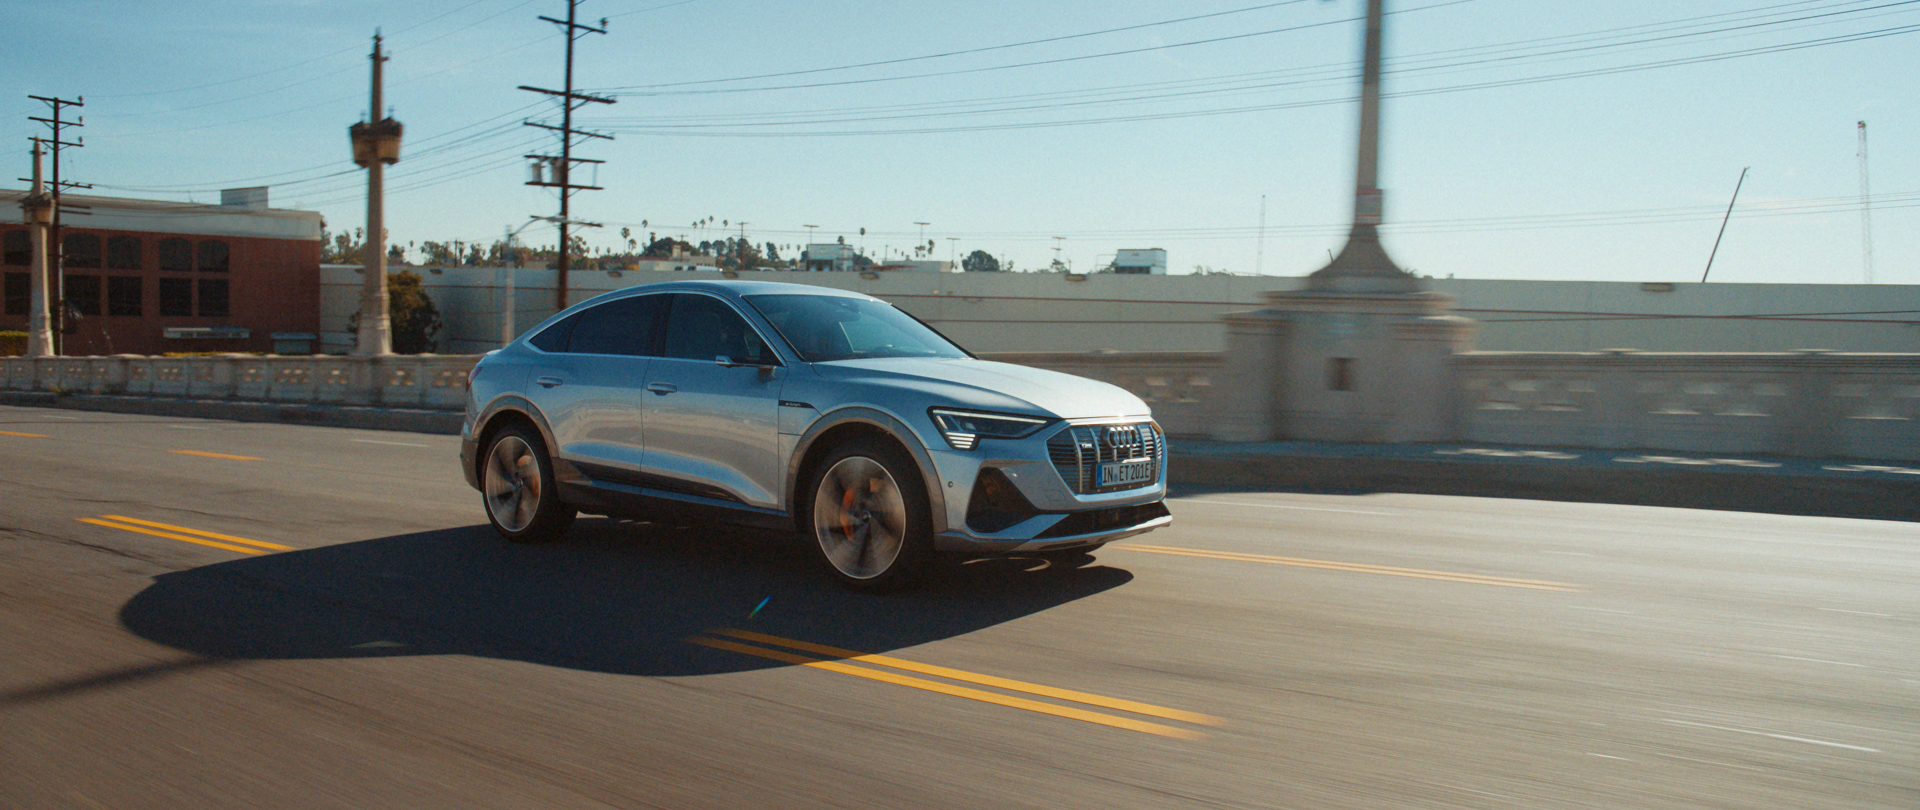 Audi Super Bowl ad “Frozen” song, electric vehicles, and climate